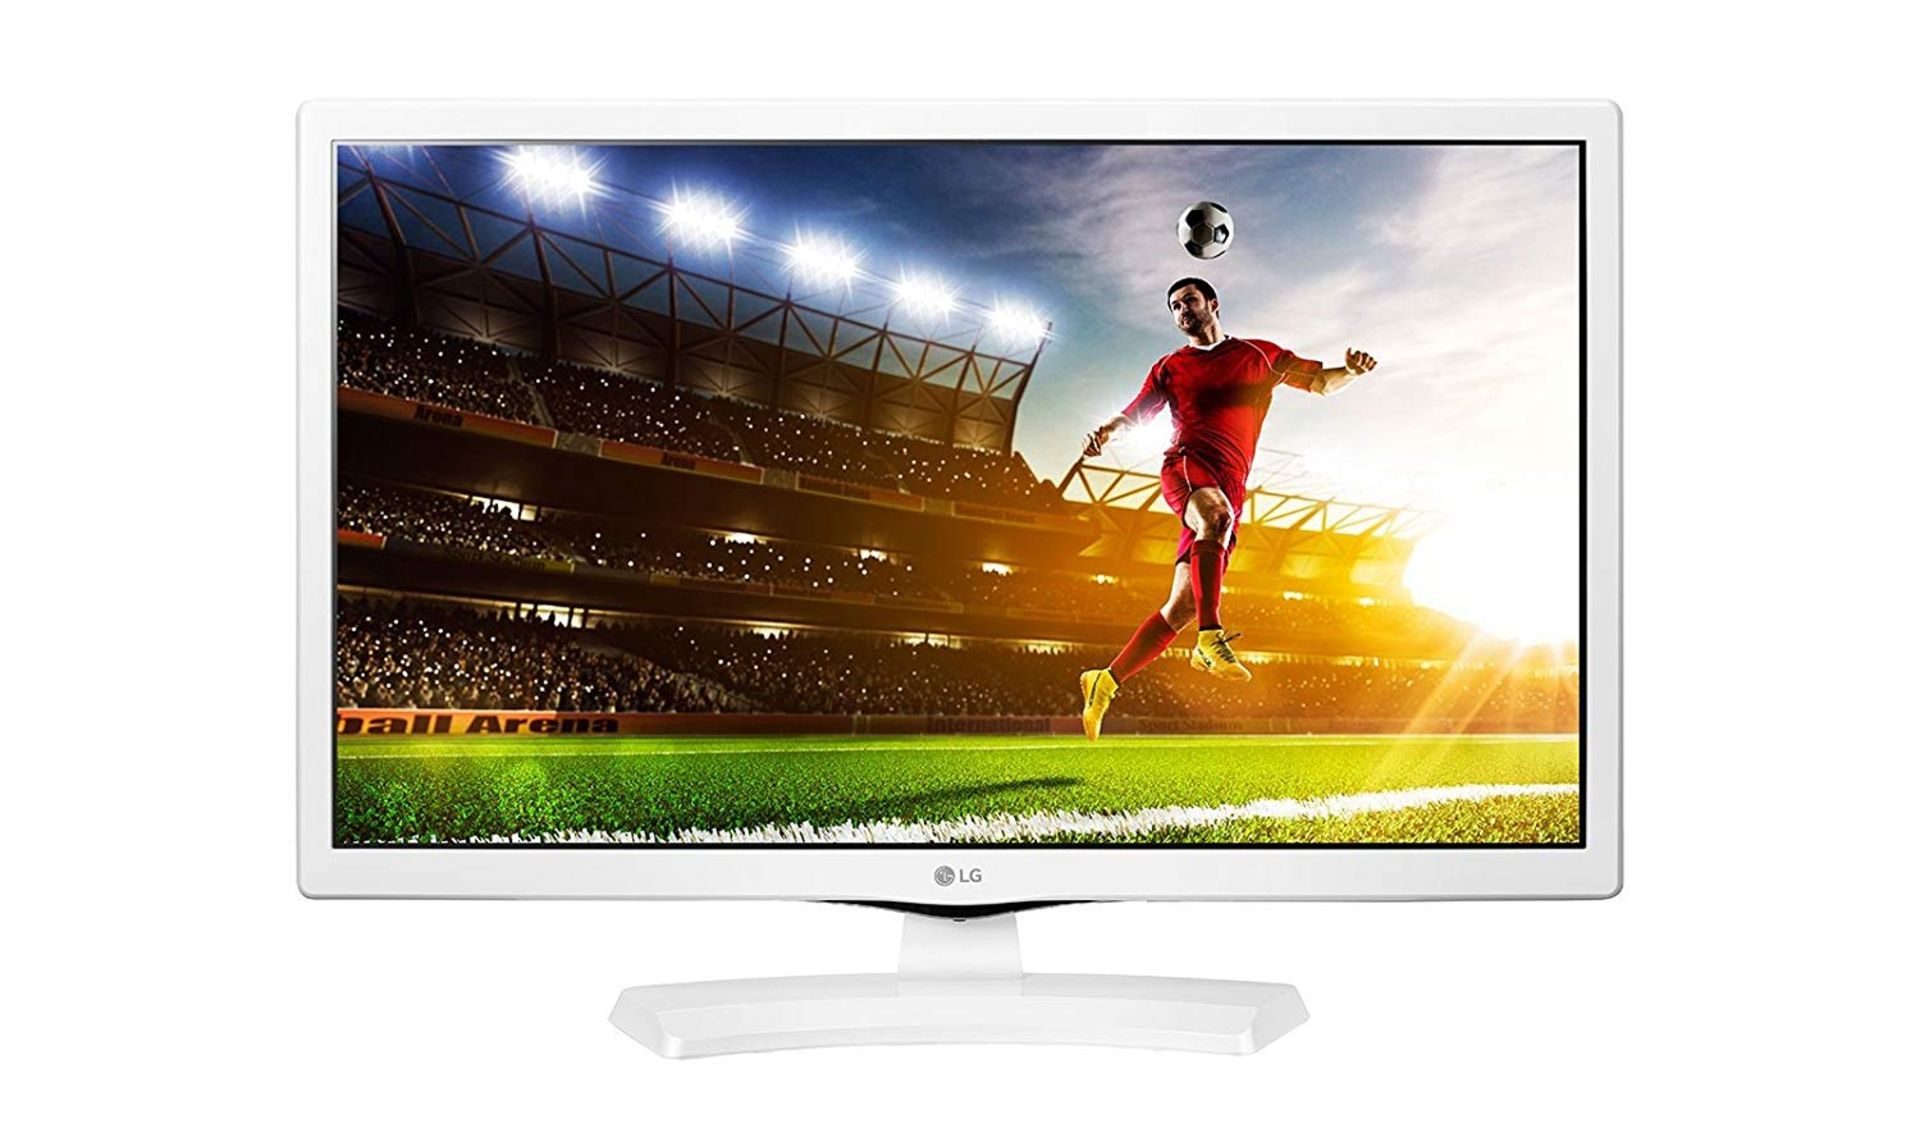 V Grade A LG 24 Inch HD READY LED TV WITH FREEVIEW - WHITE 24MT48DW-WZ